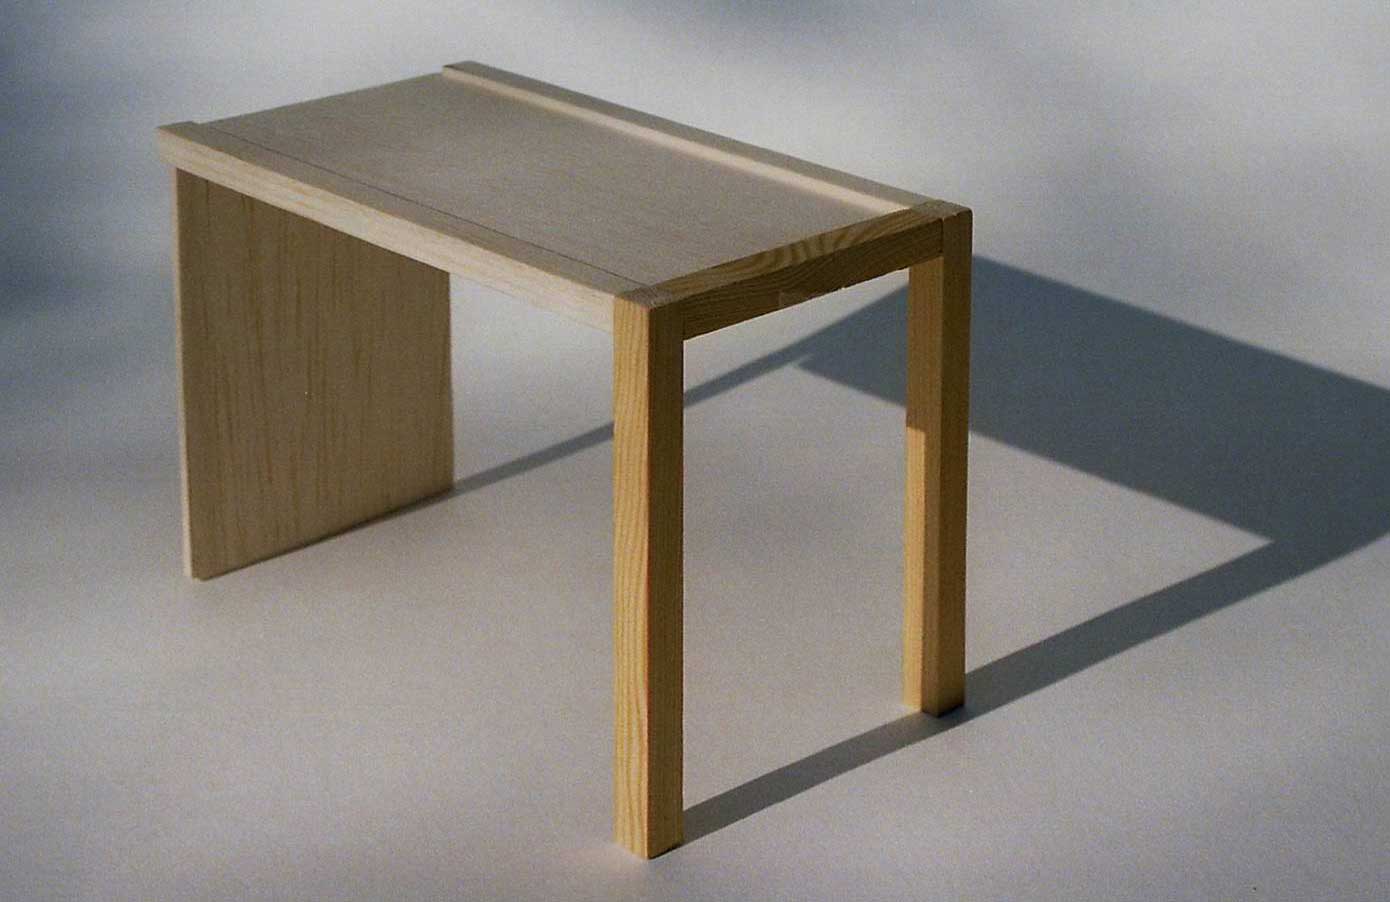 Folding Wood Tables Benefits | Office Furniture